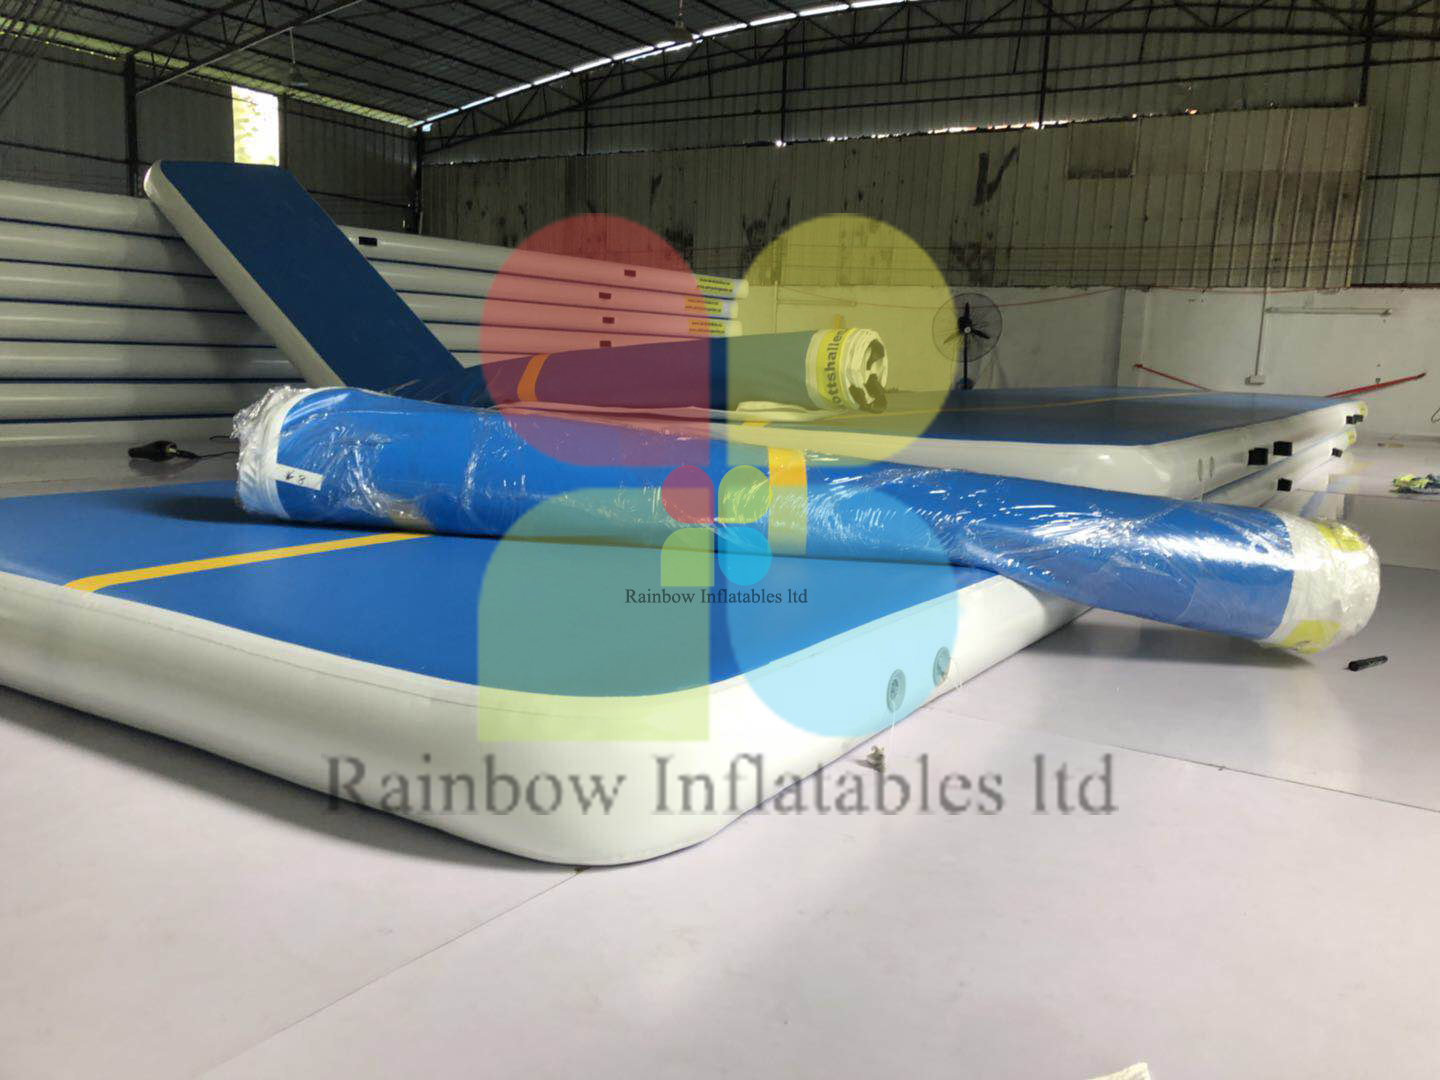 Inflatable Air Track